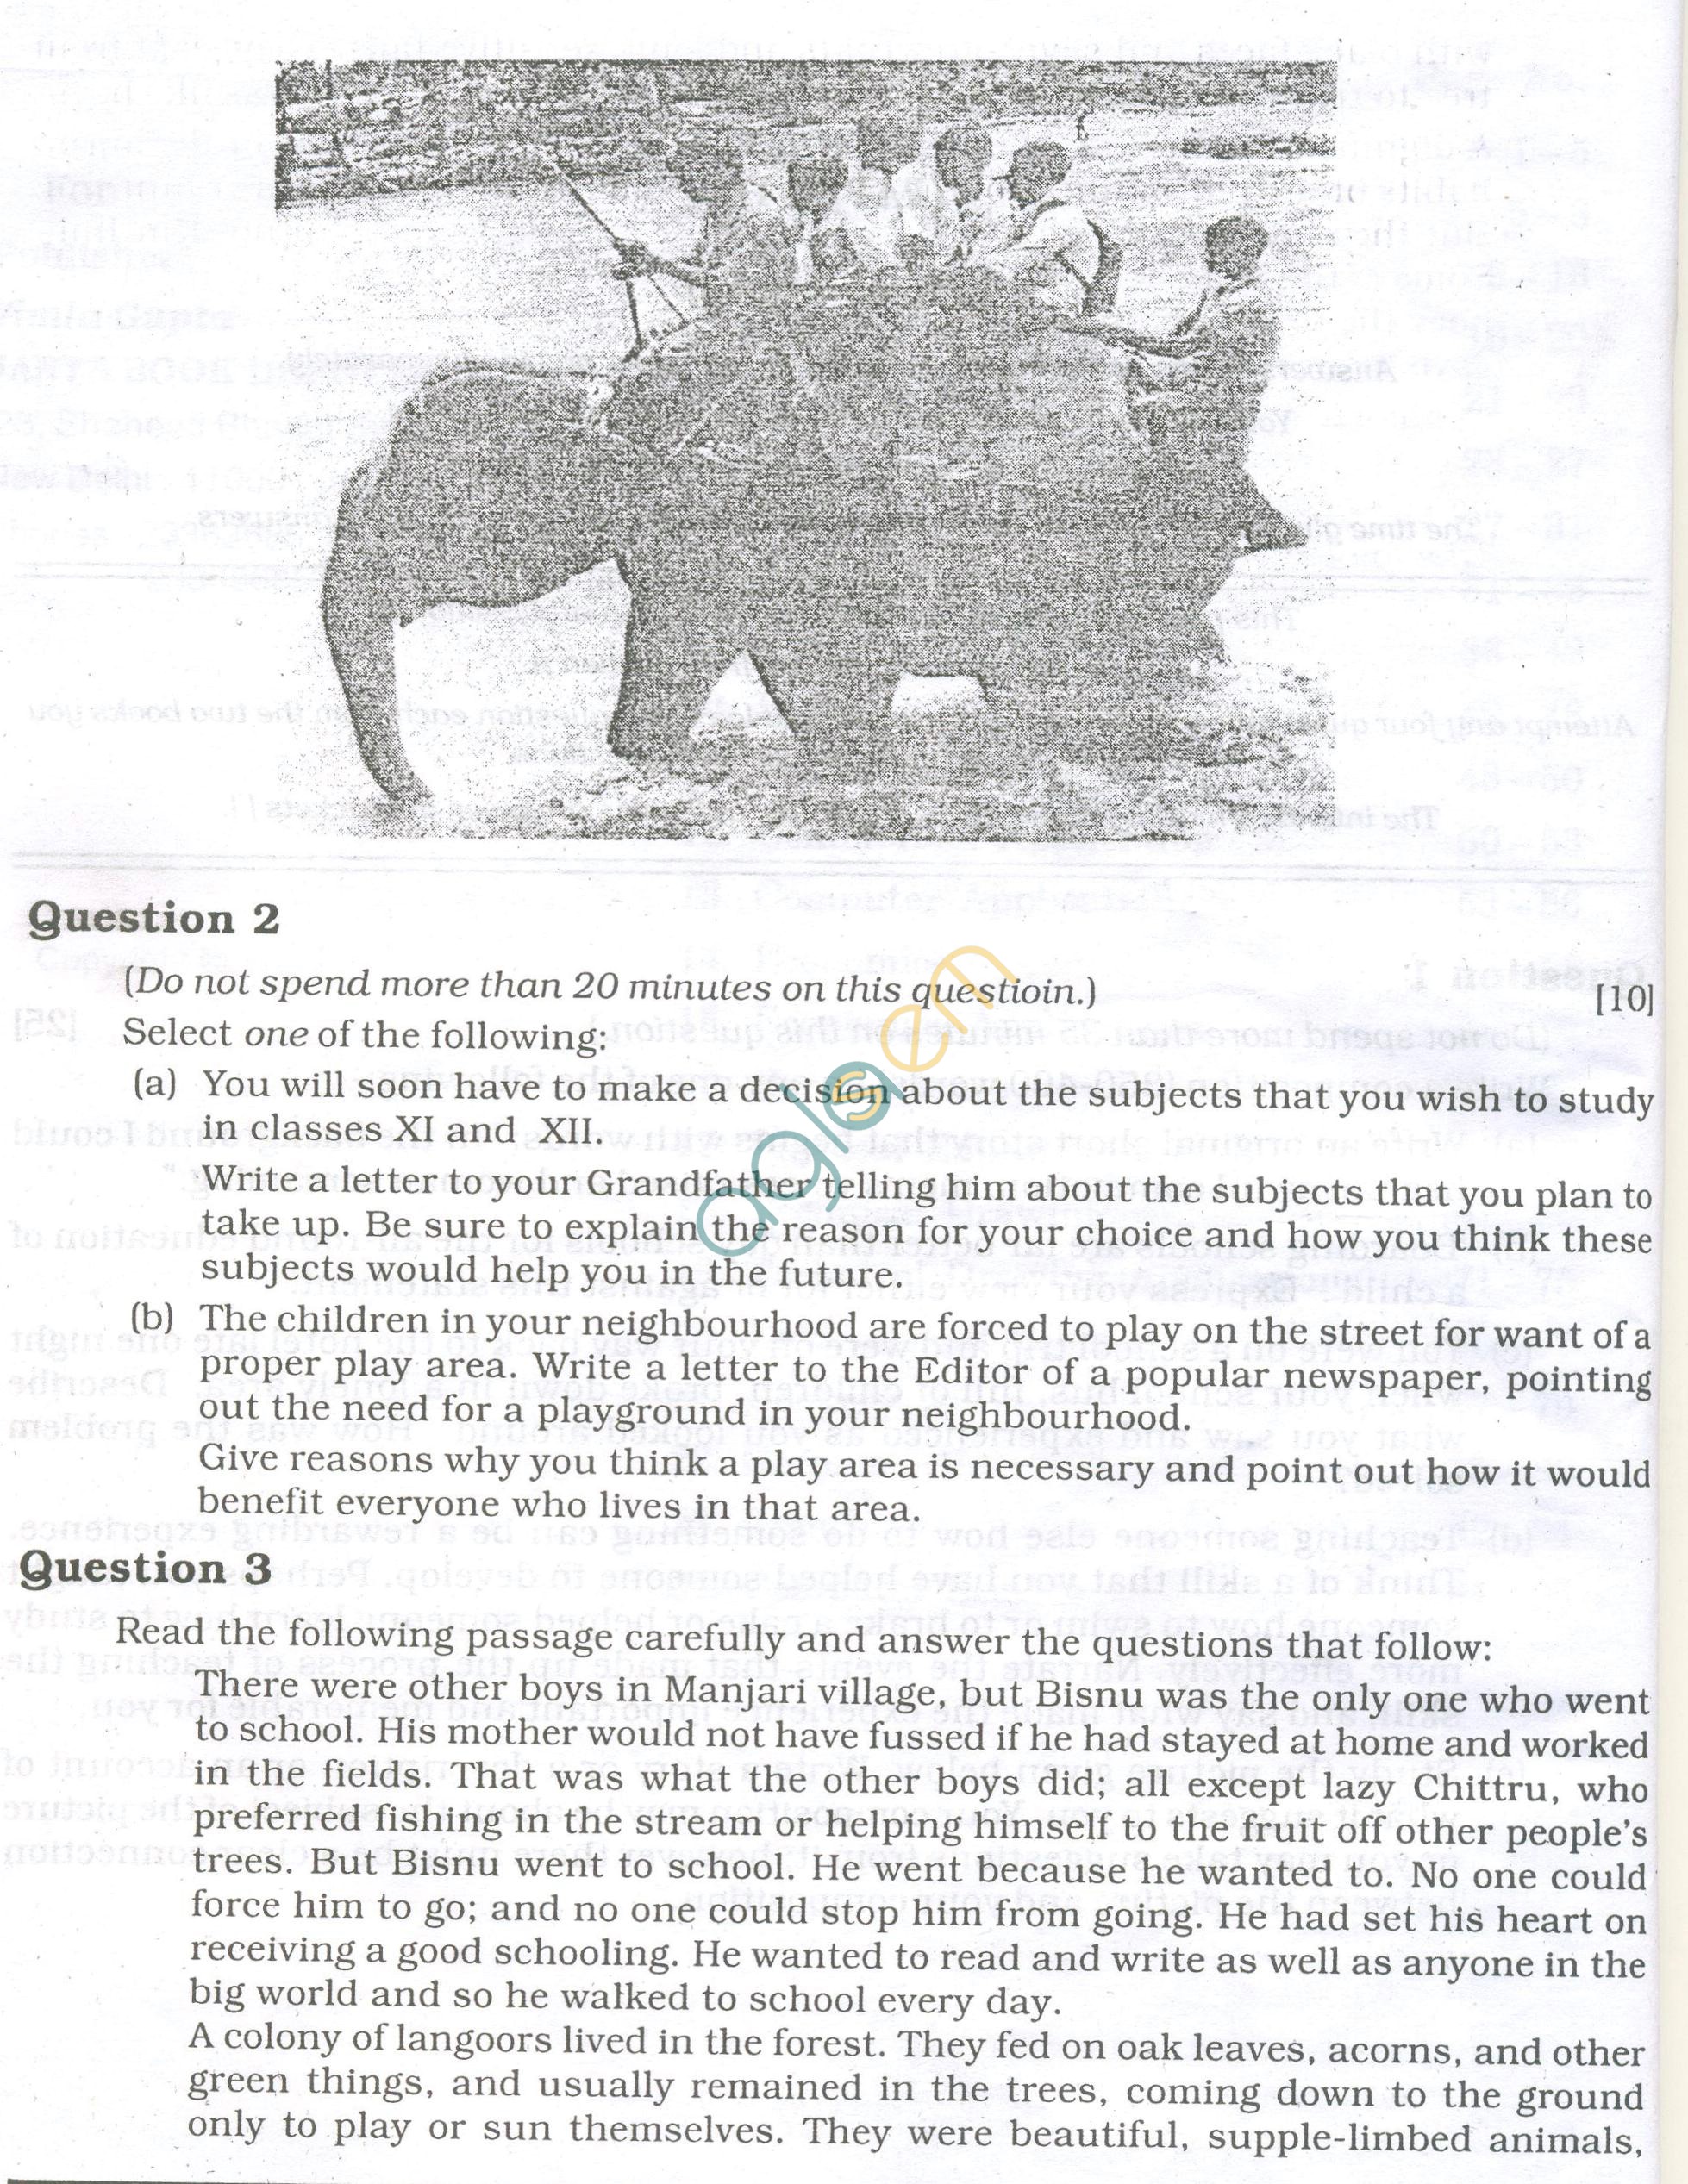 ICSE Question Papers 2013 for Class 10 - English Paper - 1